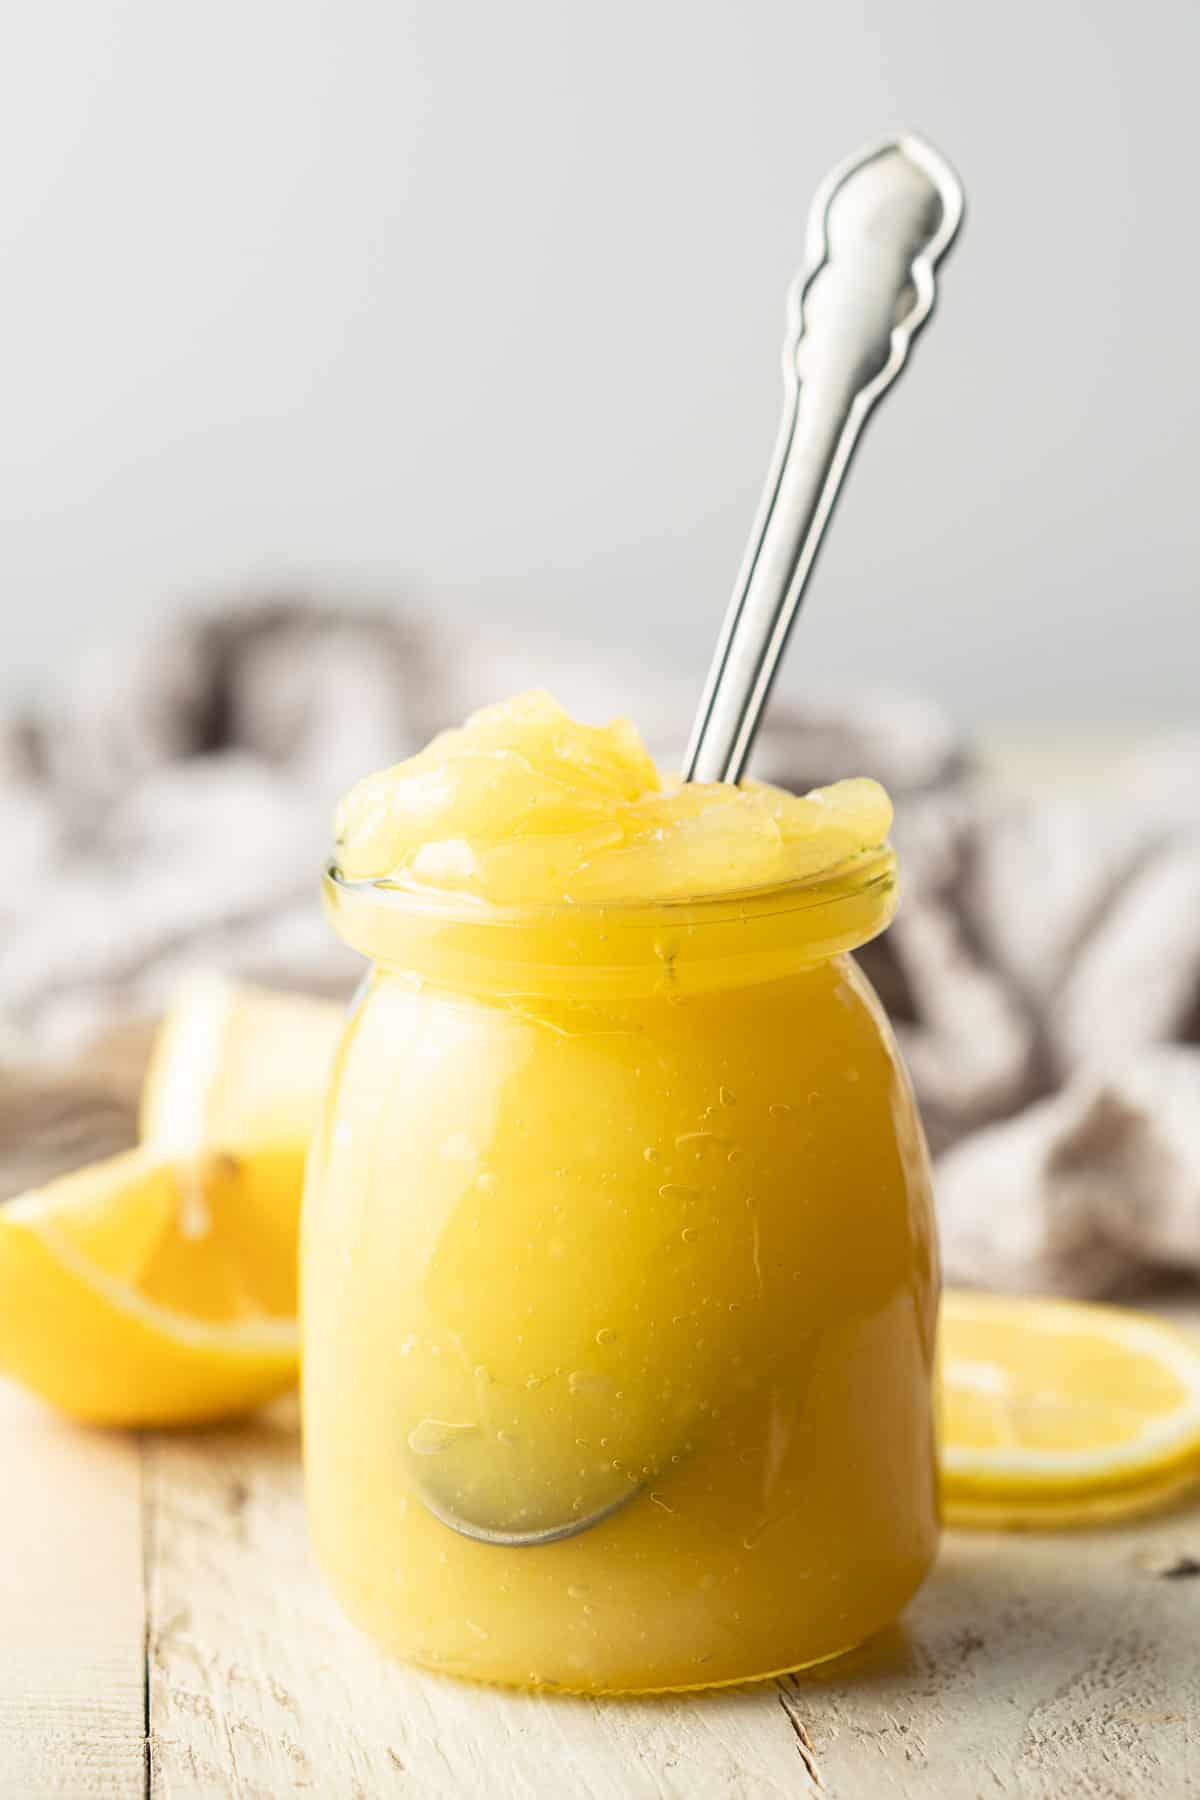 Jar of Vegan Lemon Curd with spoon sticking out, lemons and napkin in the background.